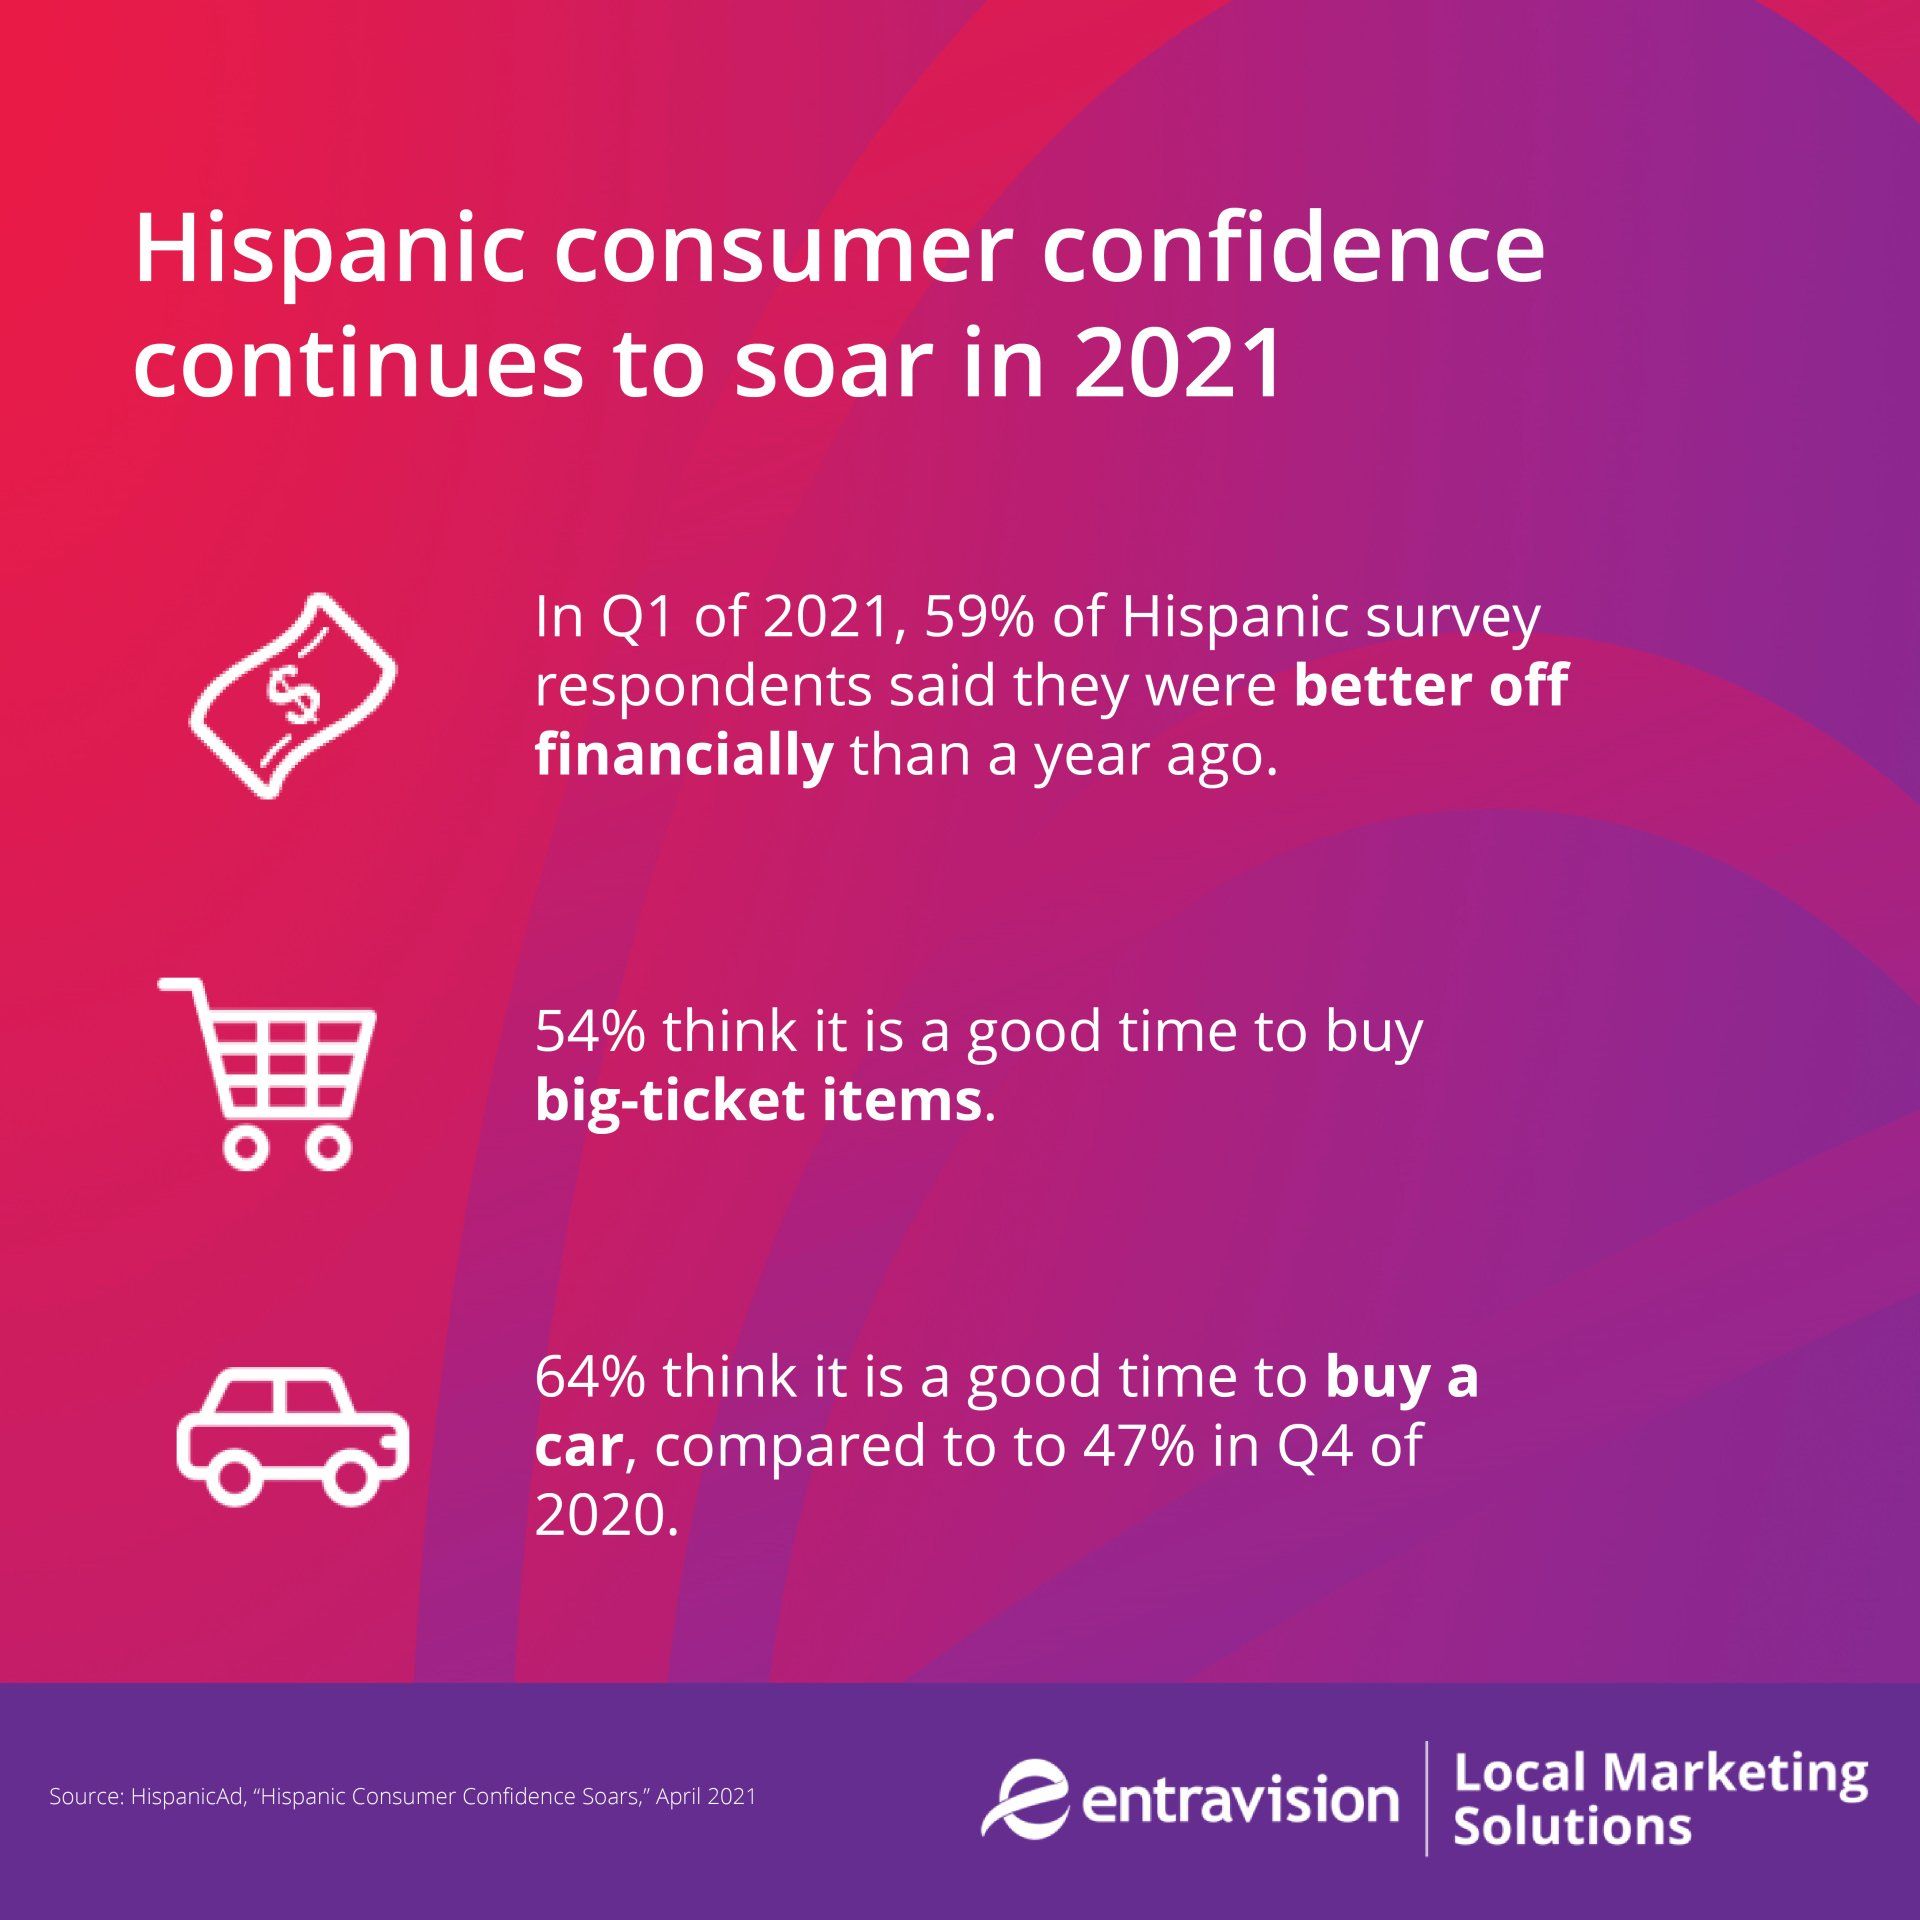 Hispanic consumer confidence has soared in 2021. Using digital marketing to reach Latino audiences is a win-win situation for your business!